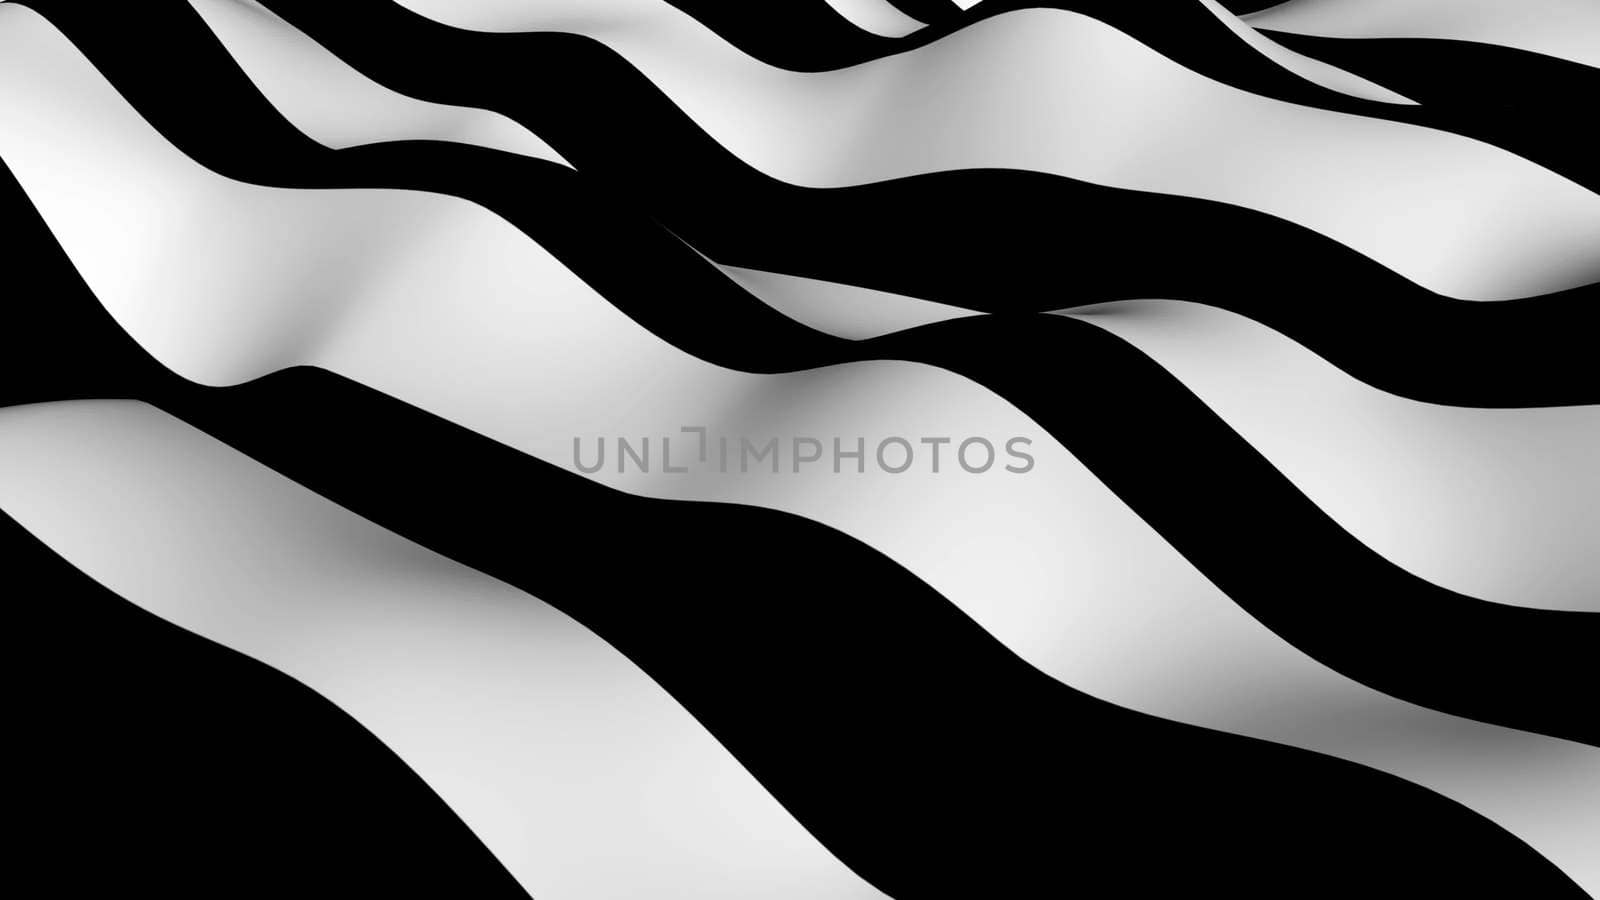 Abstract background with waving of colorful stripes. 3d rendering